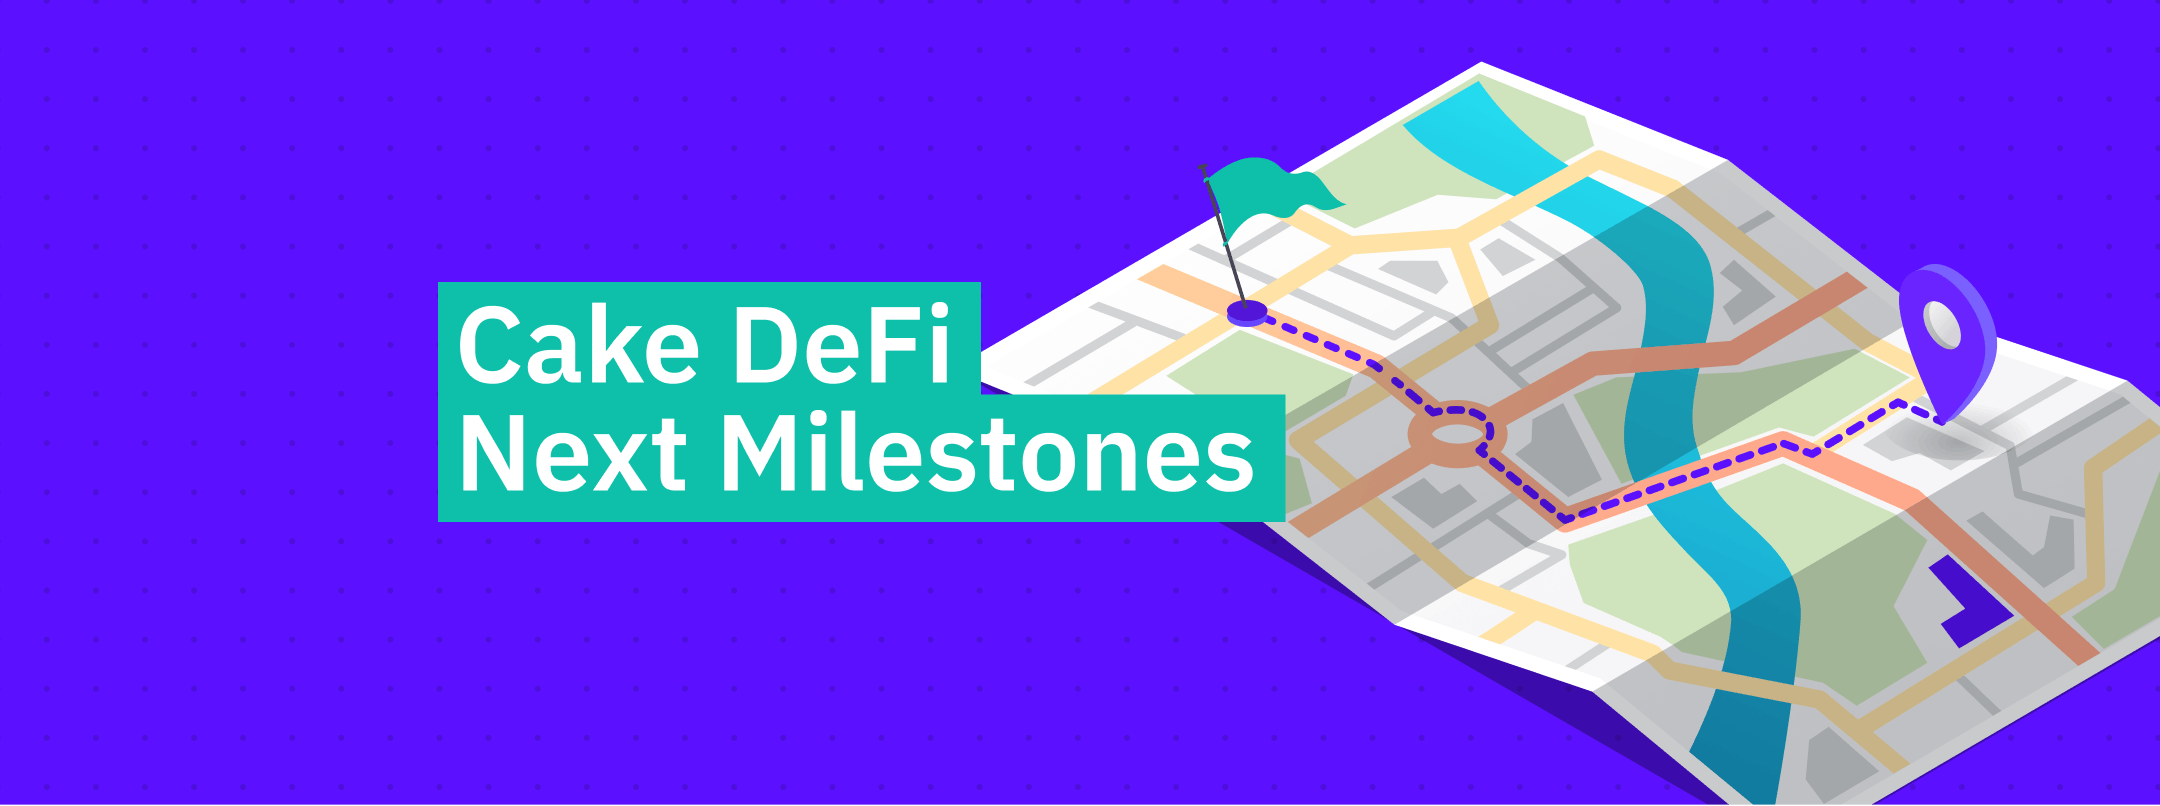 The All-New Cake DeFi: Major Updates Coming Soon!